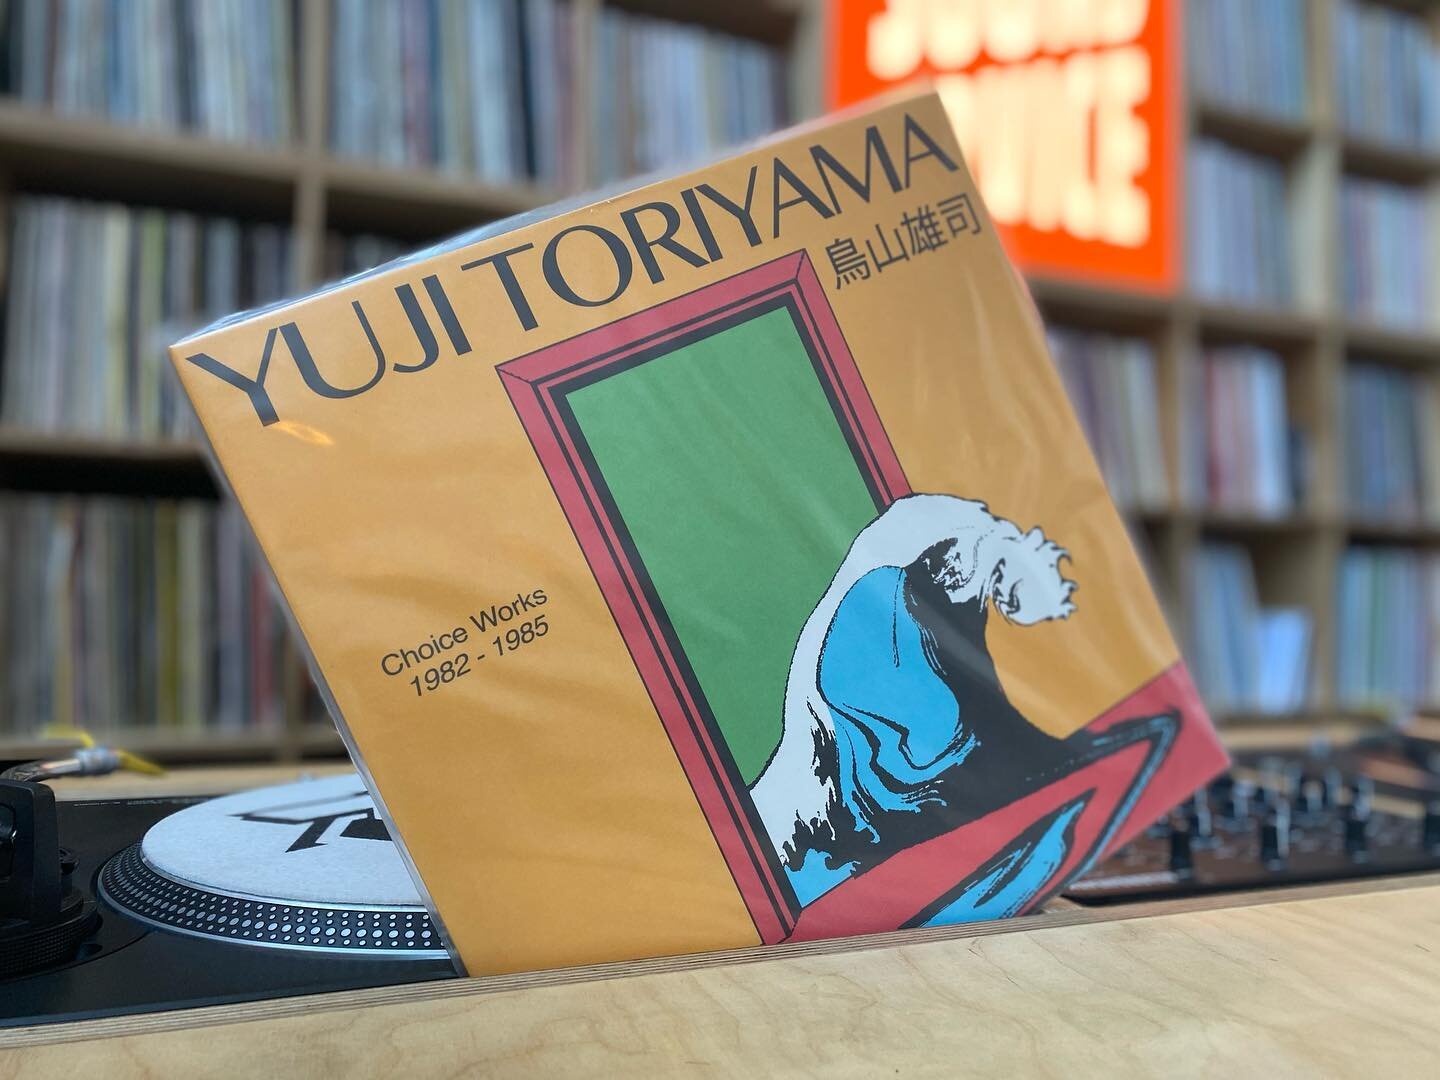 Yuji Toriyama, regarded as one of the pioneering Japanese fusionists alongside Hiroshi Sato, Ryo Kawasaki and Yasuaki Shimizu. Toriyama has not enjoyed as much recognition as his contemporary, after shunning a solo career in favour of pop and TV arra